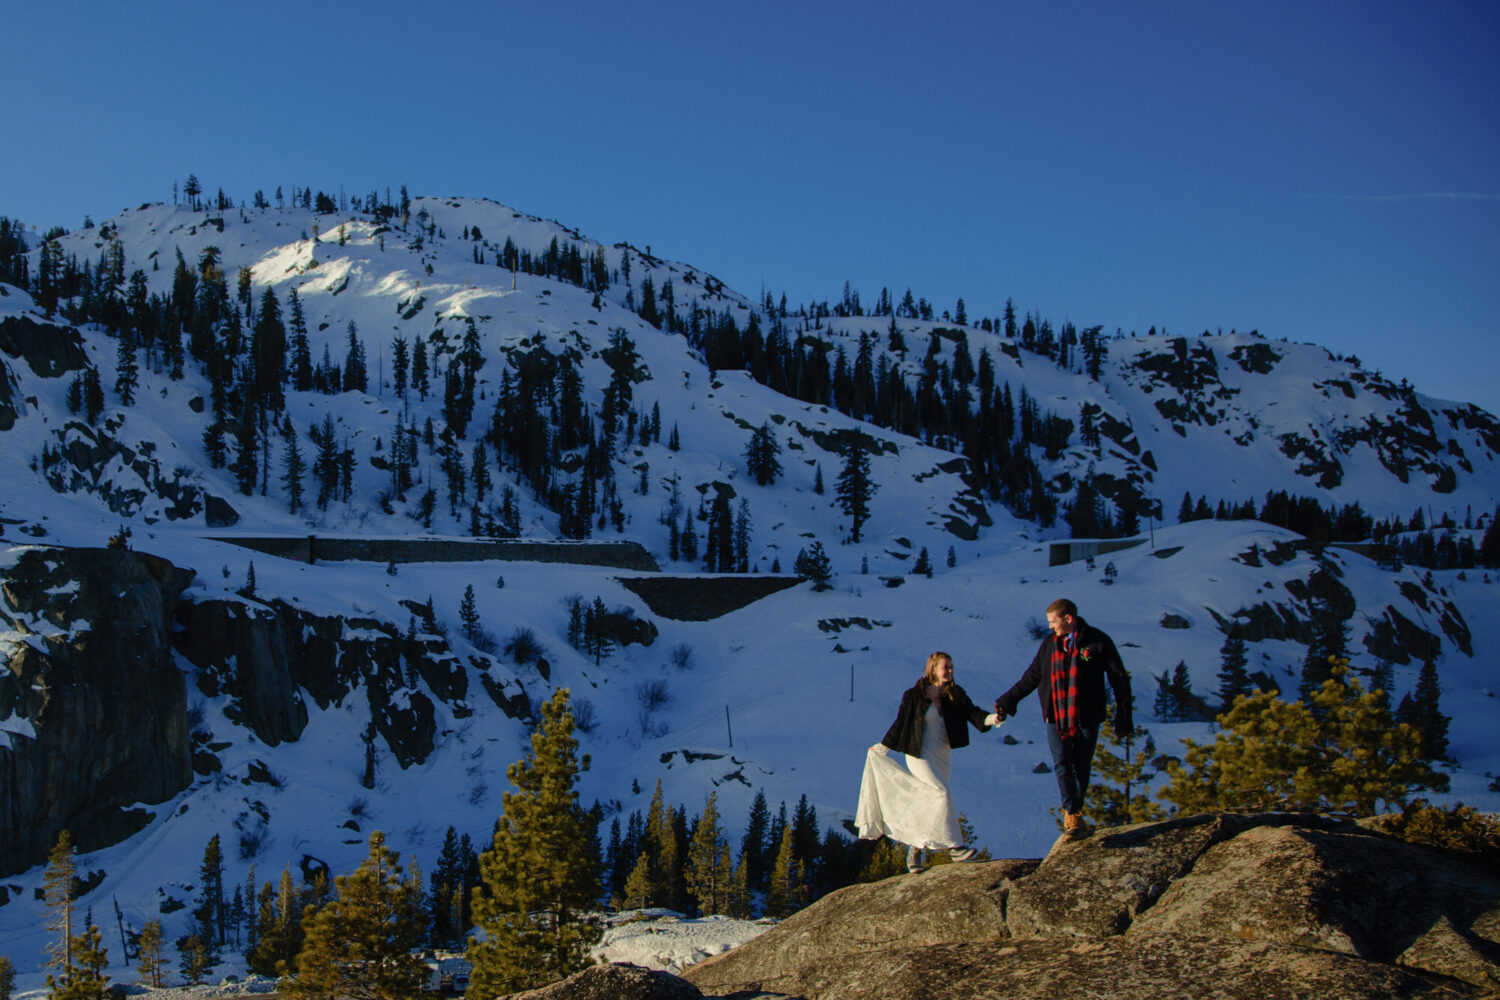 A couple explores the snowy mountain landscape at a winter elopement in Lake Tahoe.